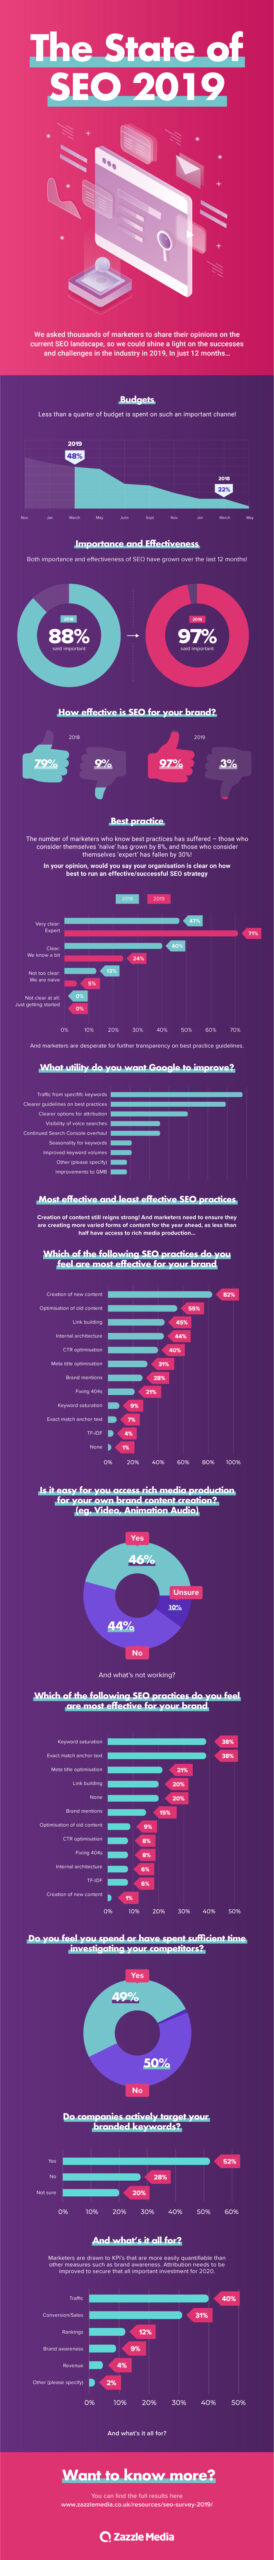 30 seo stats from 2019 to guide your strategy in 2020 and beyond infographic scaled